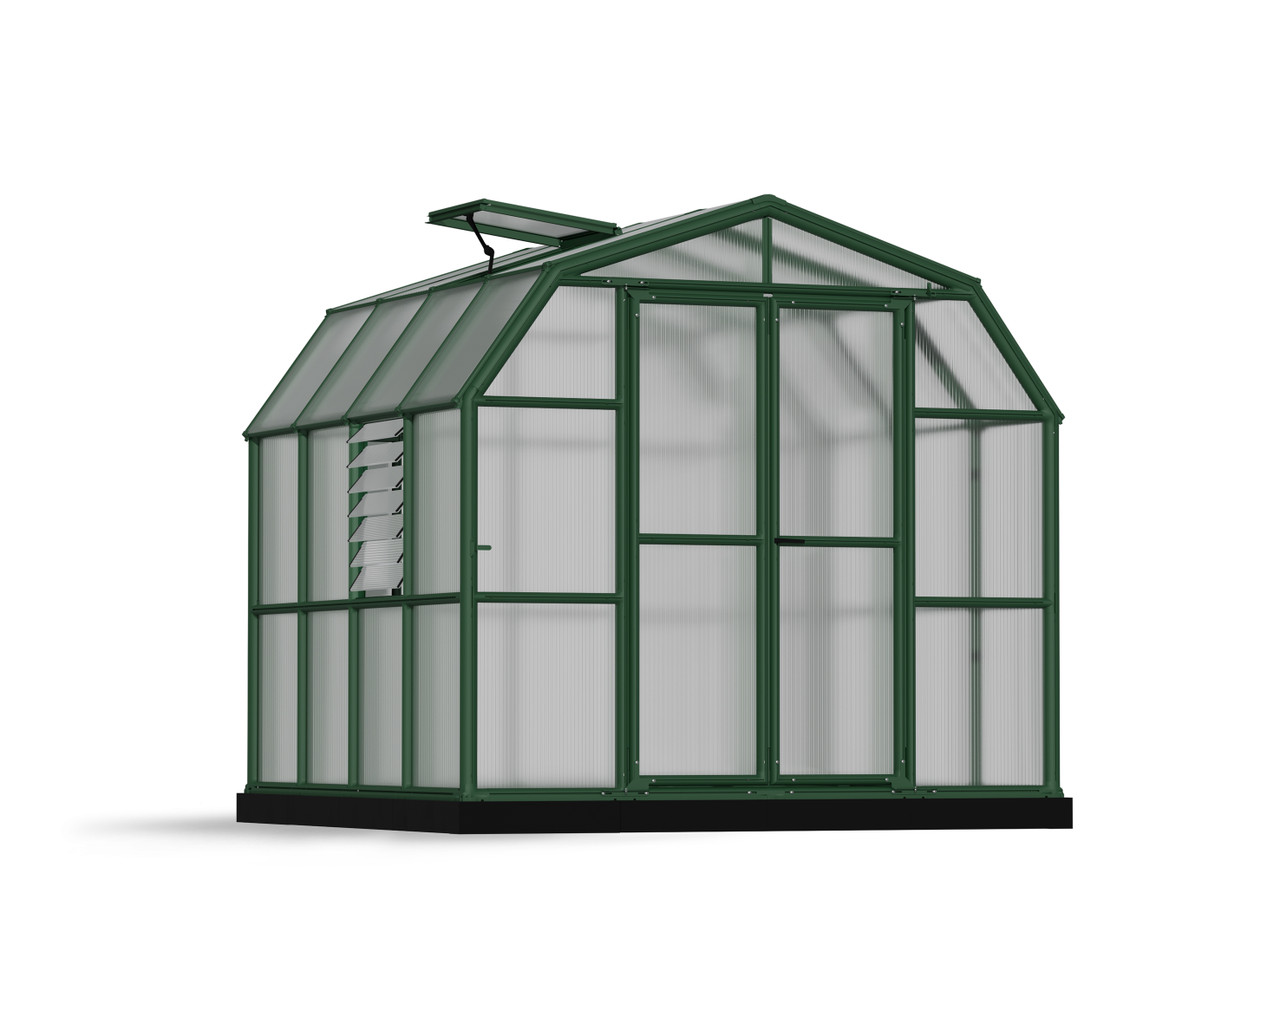 4mm Clear Polycarbonate Glazing Greenhouse Covers Shed Roofing Twin Wall Sheet